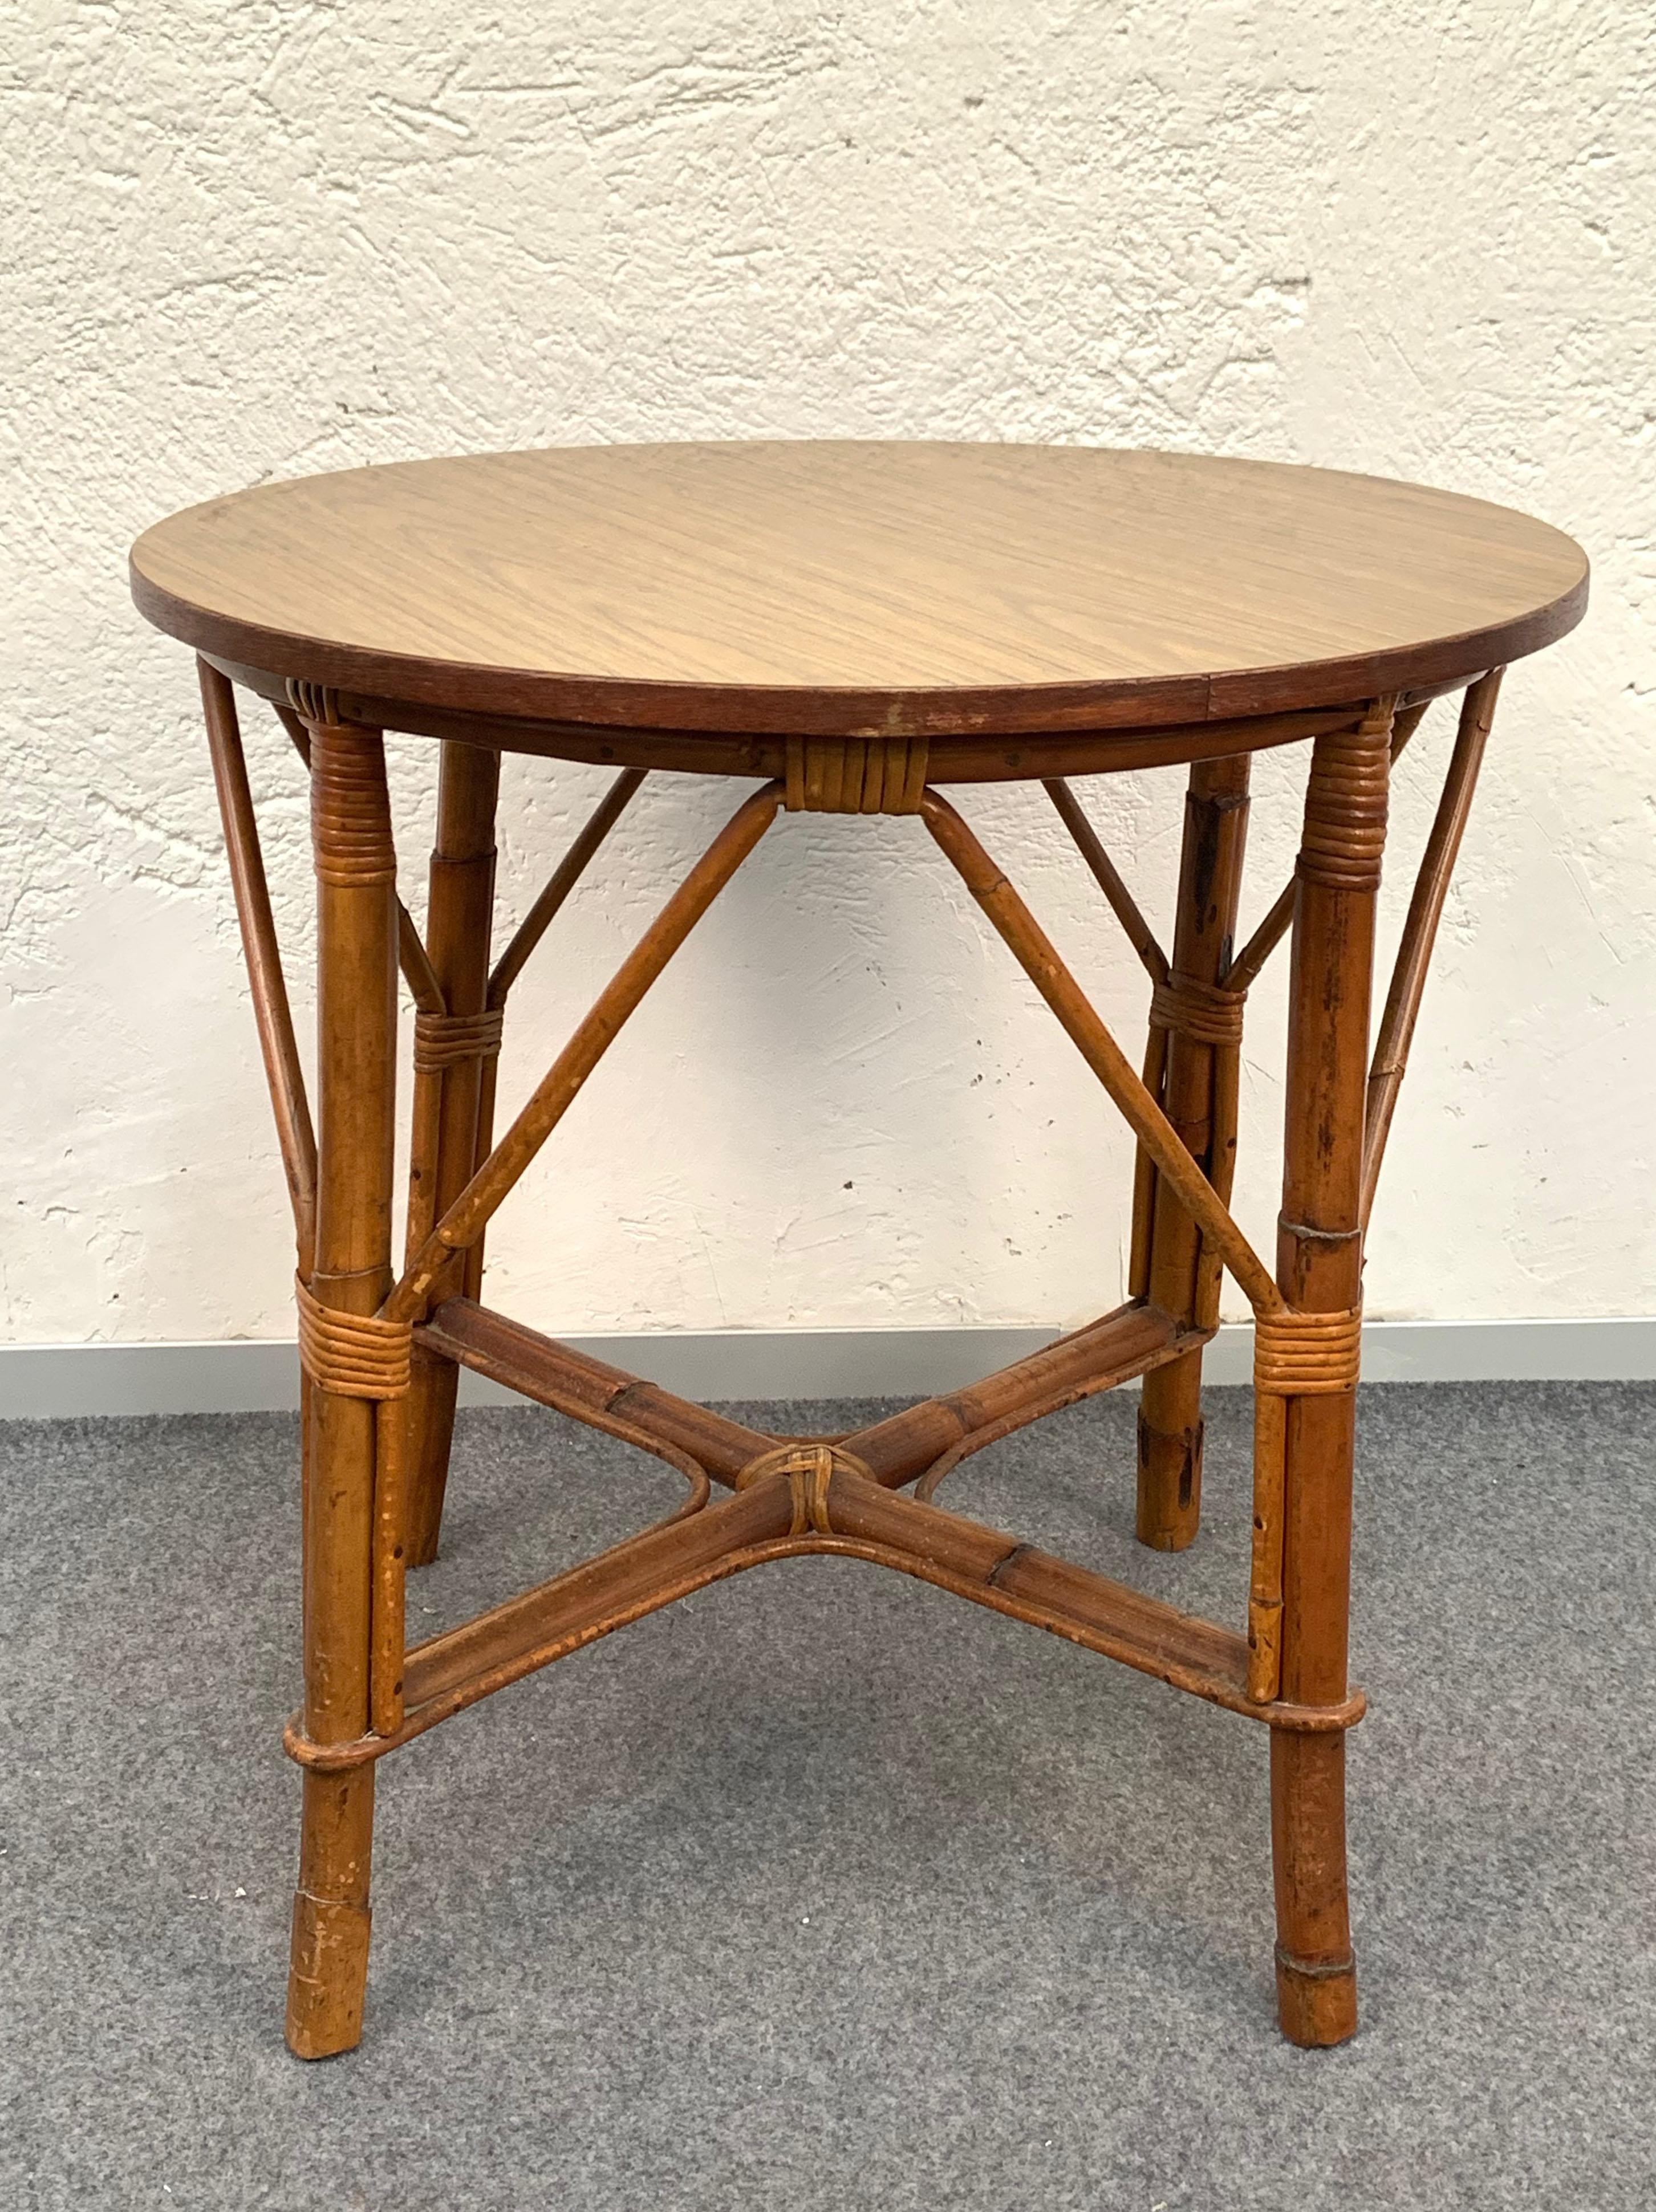 Round midcentury bamboo and rattan side or coffee table with laminated top.

This amazing item was produced in Italy during 1960s.

This wonderful piece will smarten a midcentury-style living room.